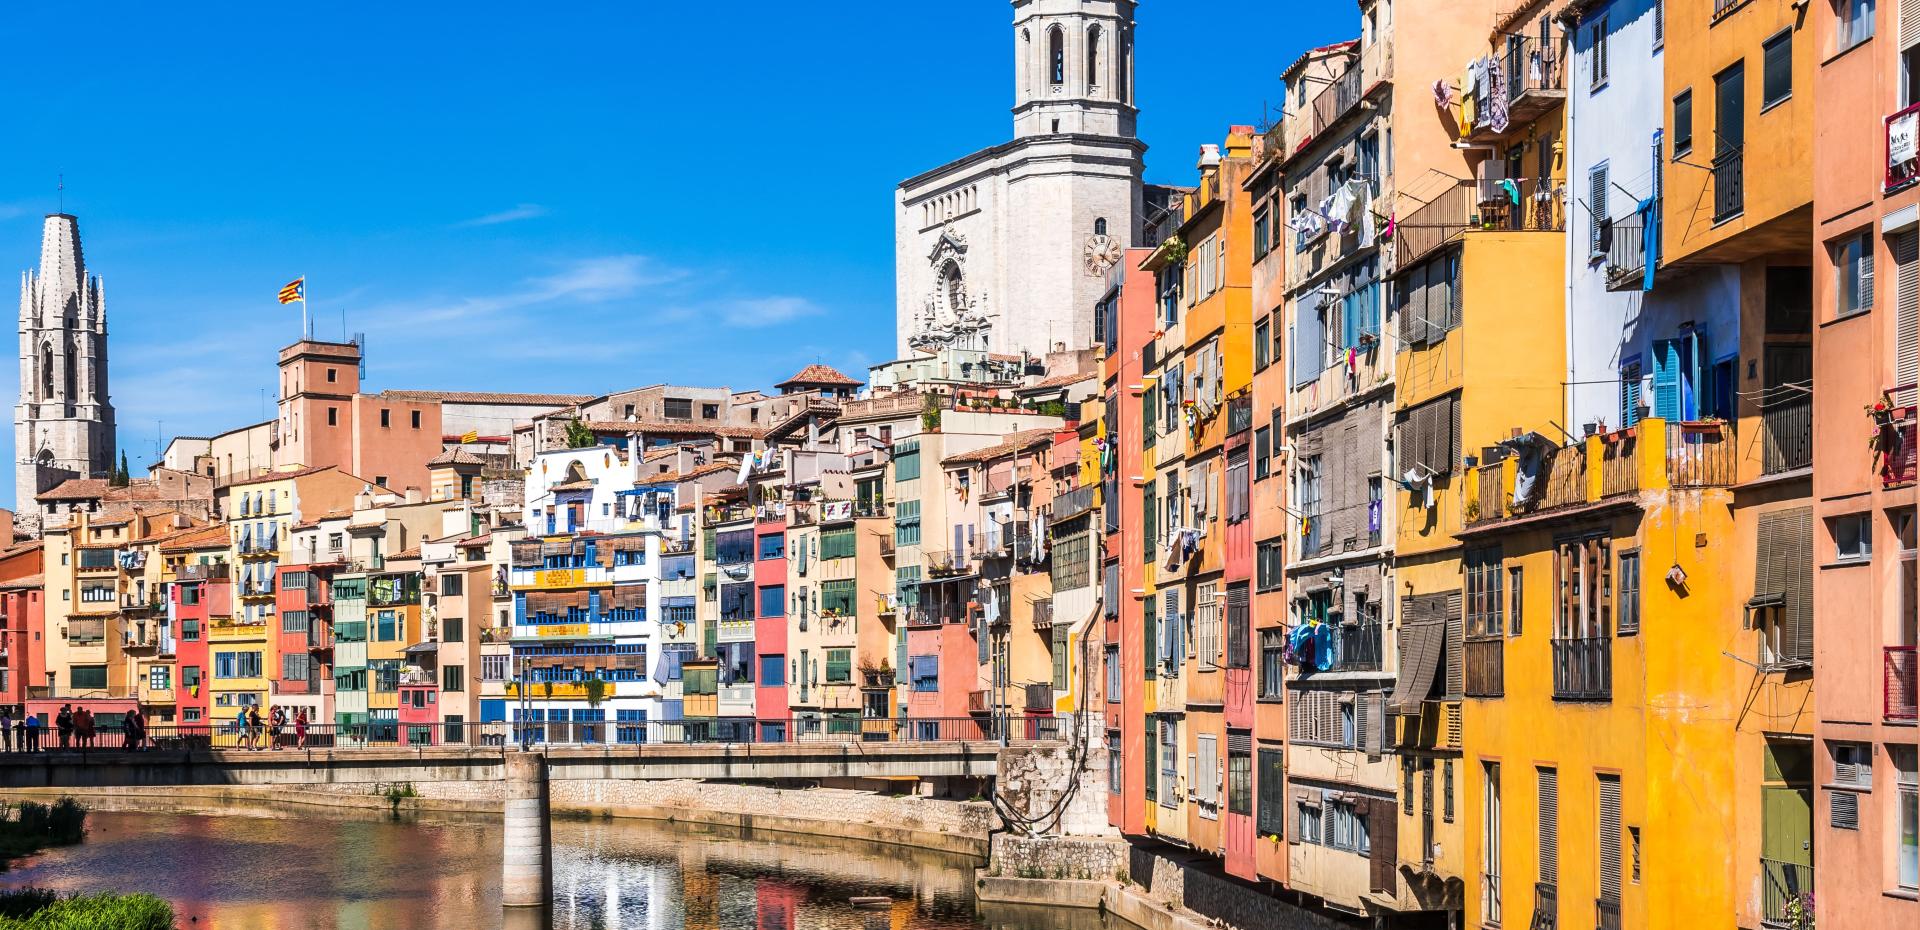 What to do in Girona, Spain?